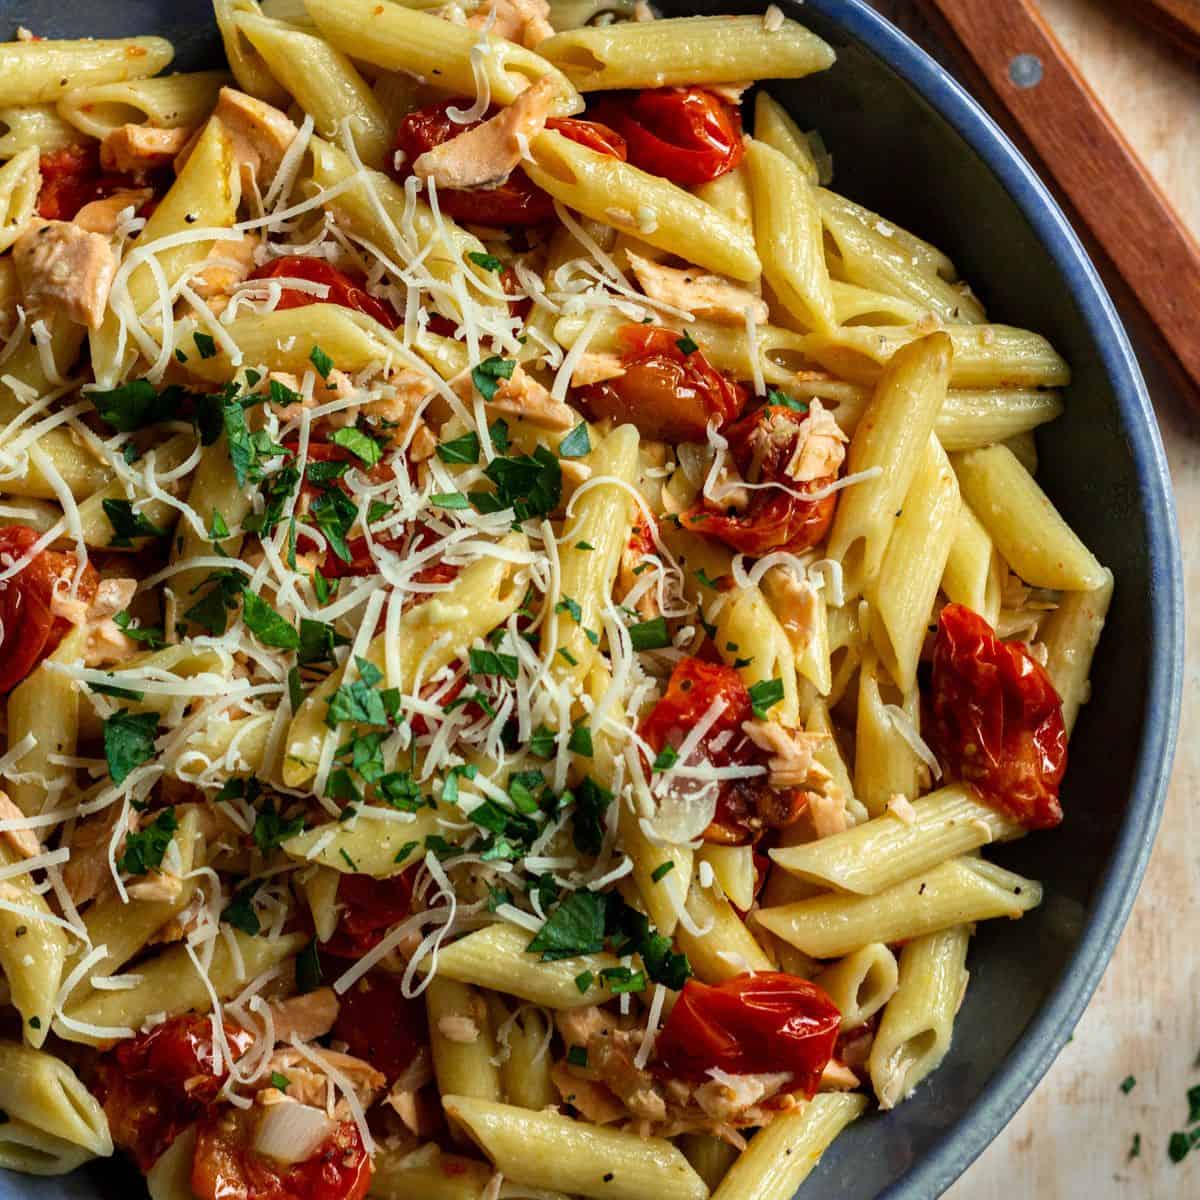 Salmon pasta without cream in a large blue bowl.